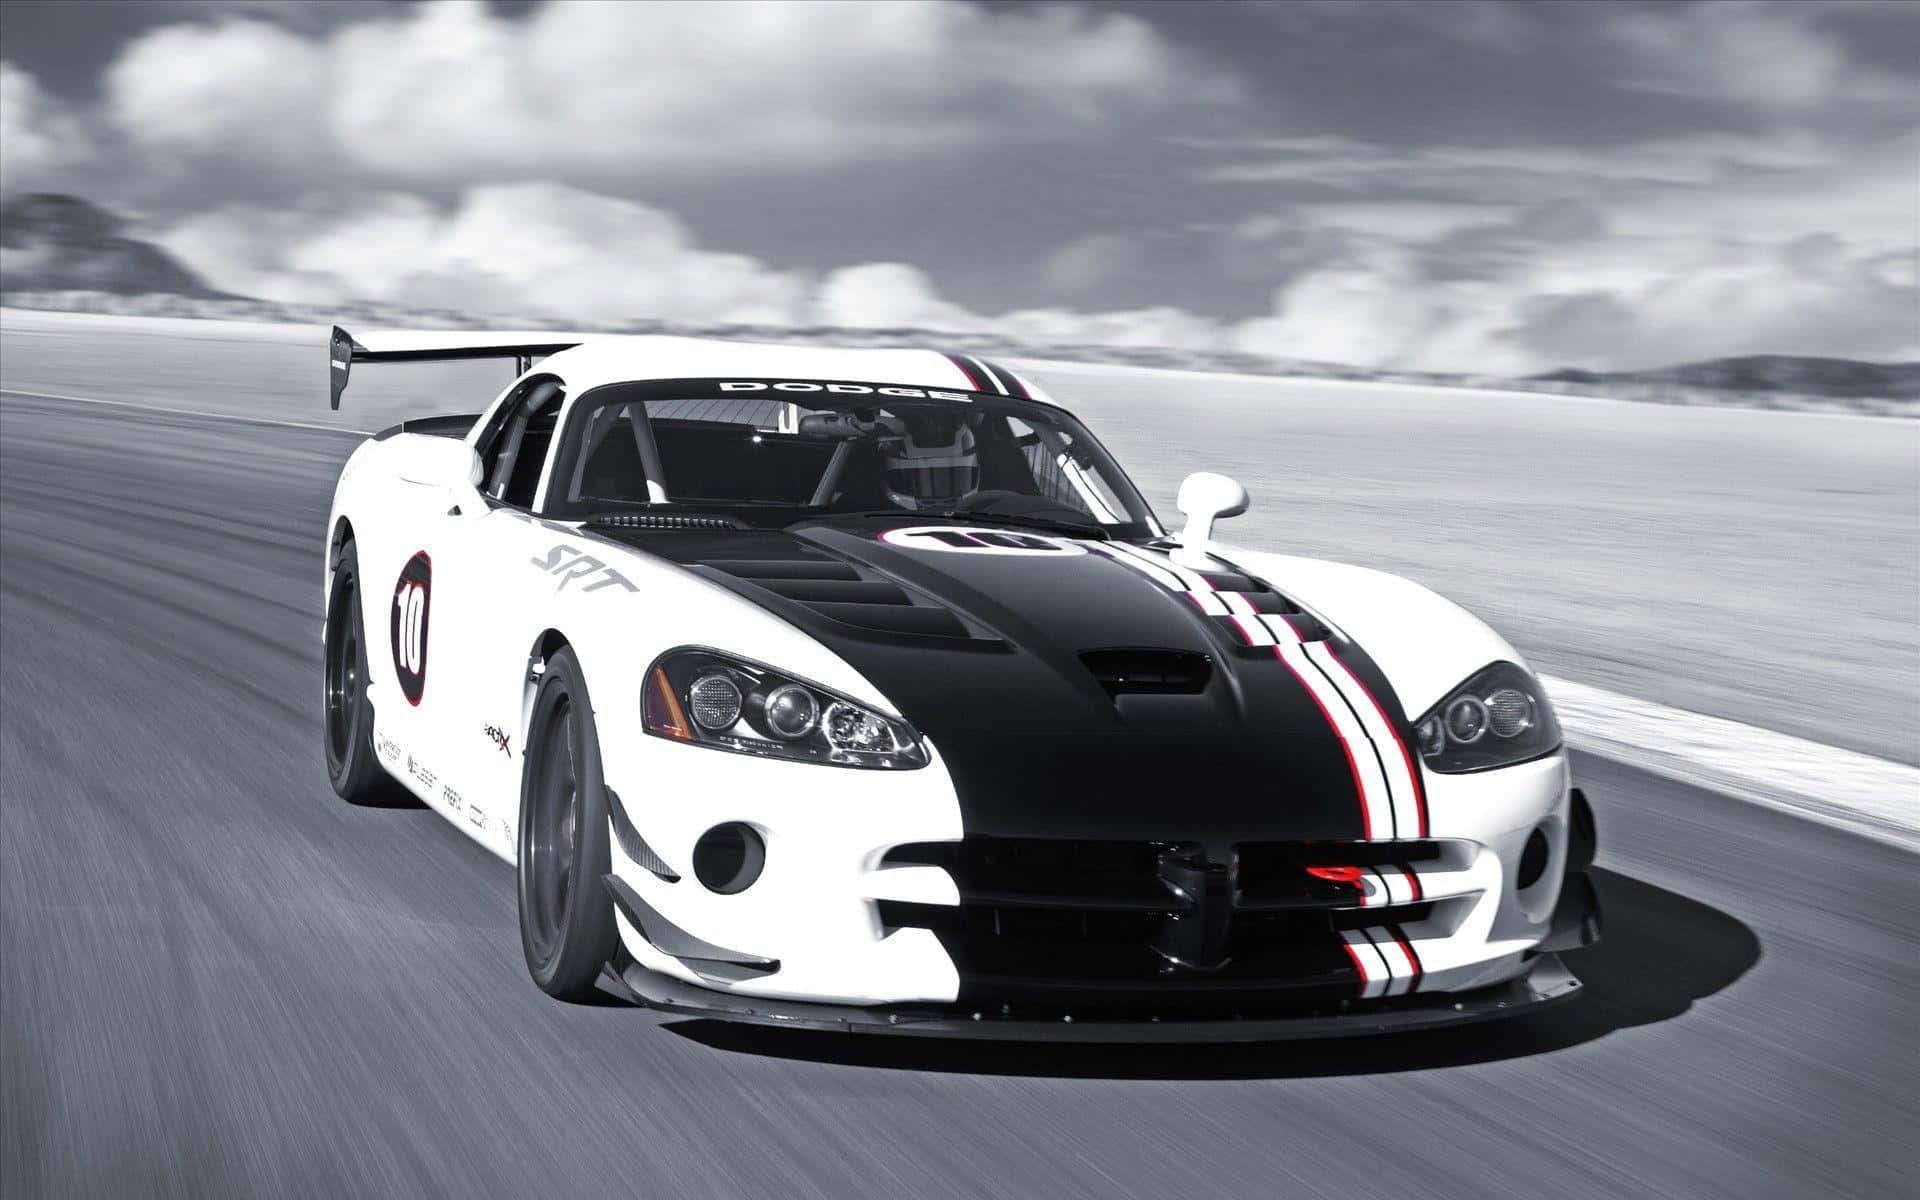 Red hot Dodge Viper on the streets Wallpaper